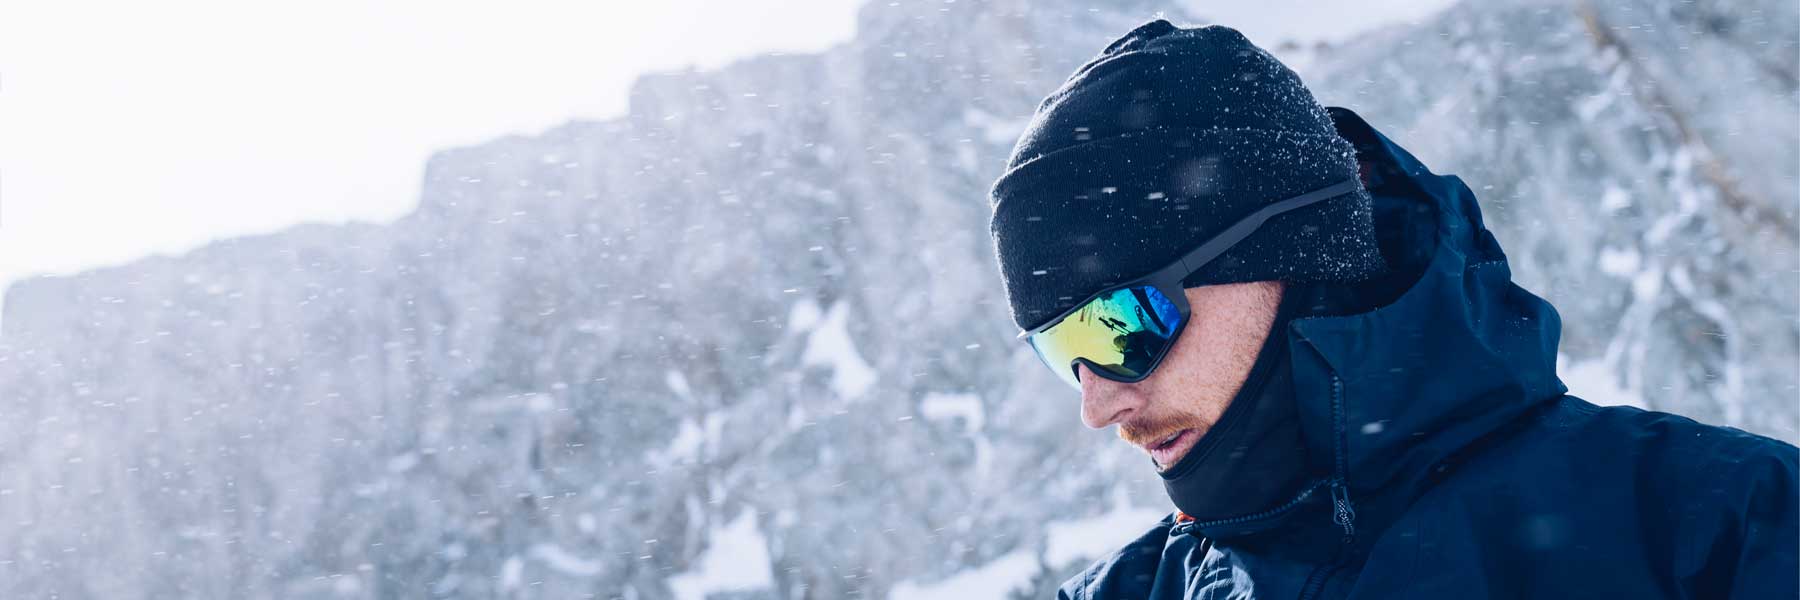 27 Best sunglasses for skiing